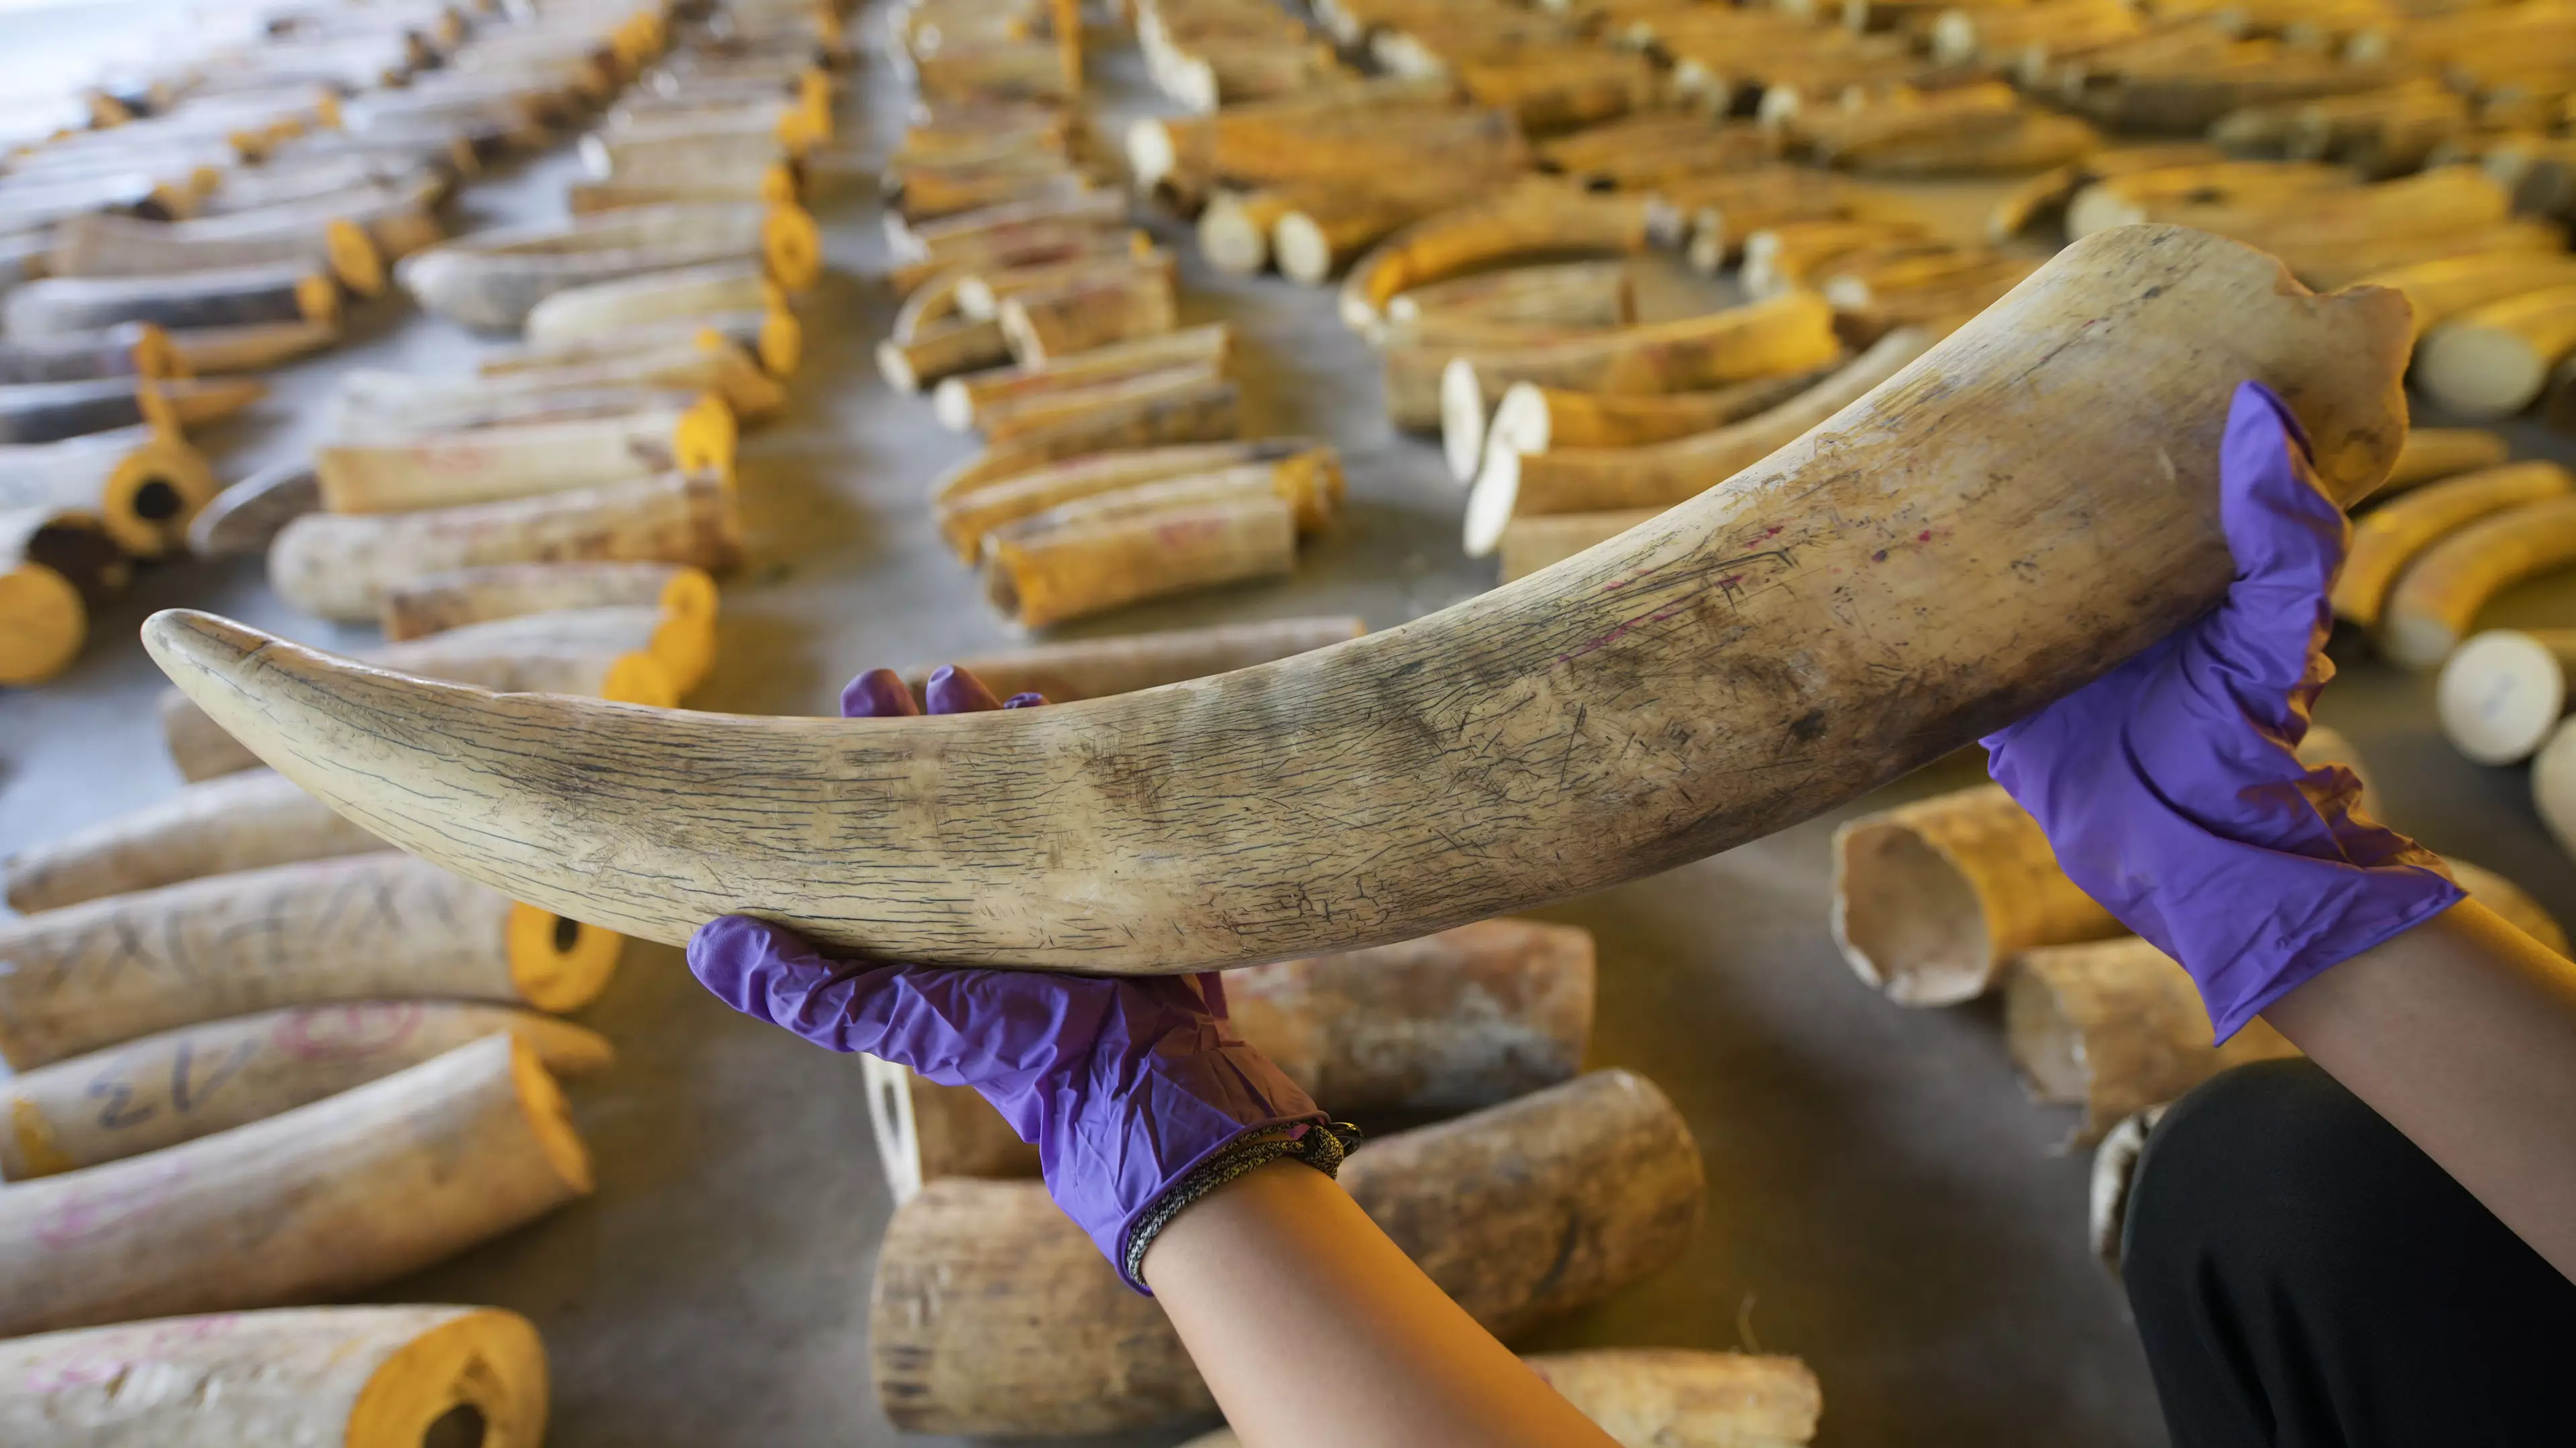 Government Will Close Legal Loophole That Allows Ivory To Be Trafficked In Australia